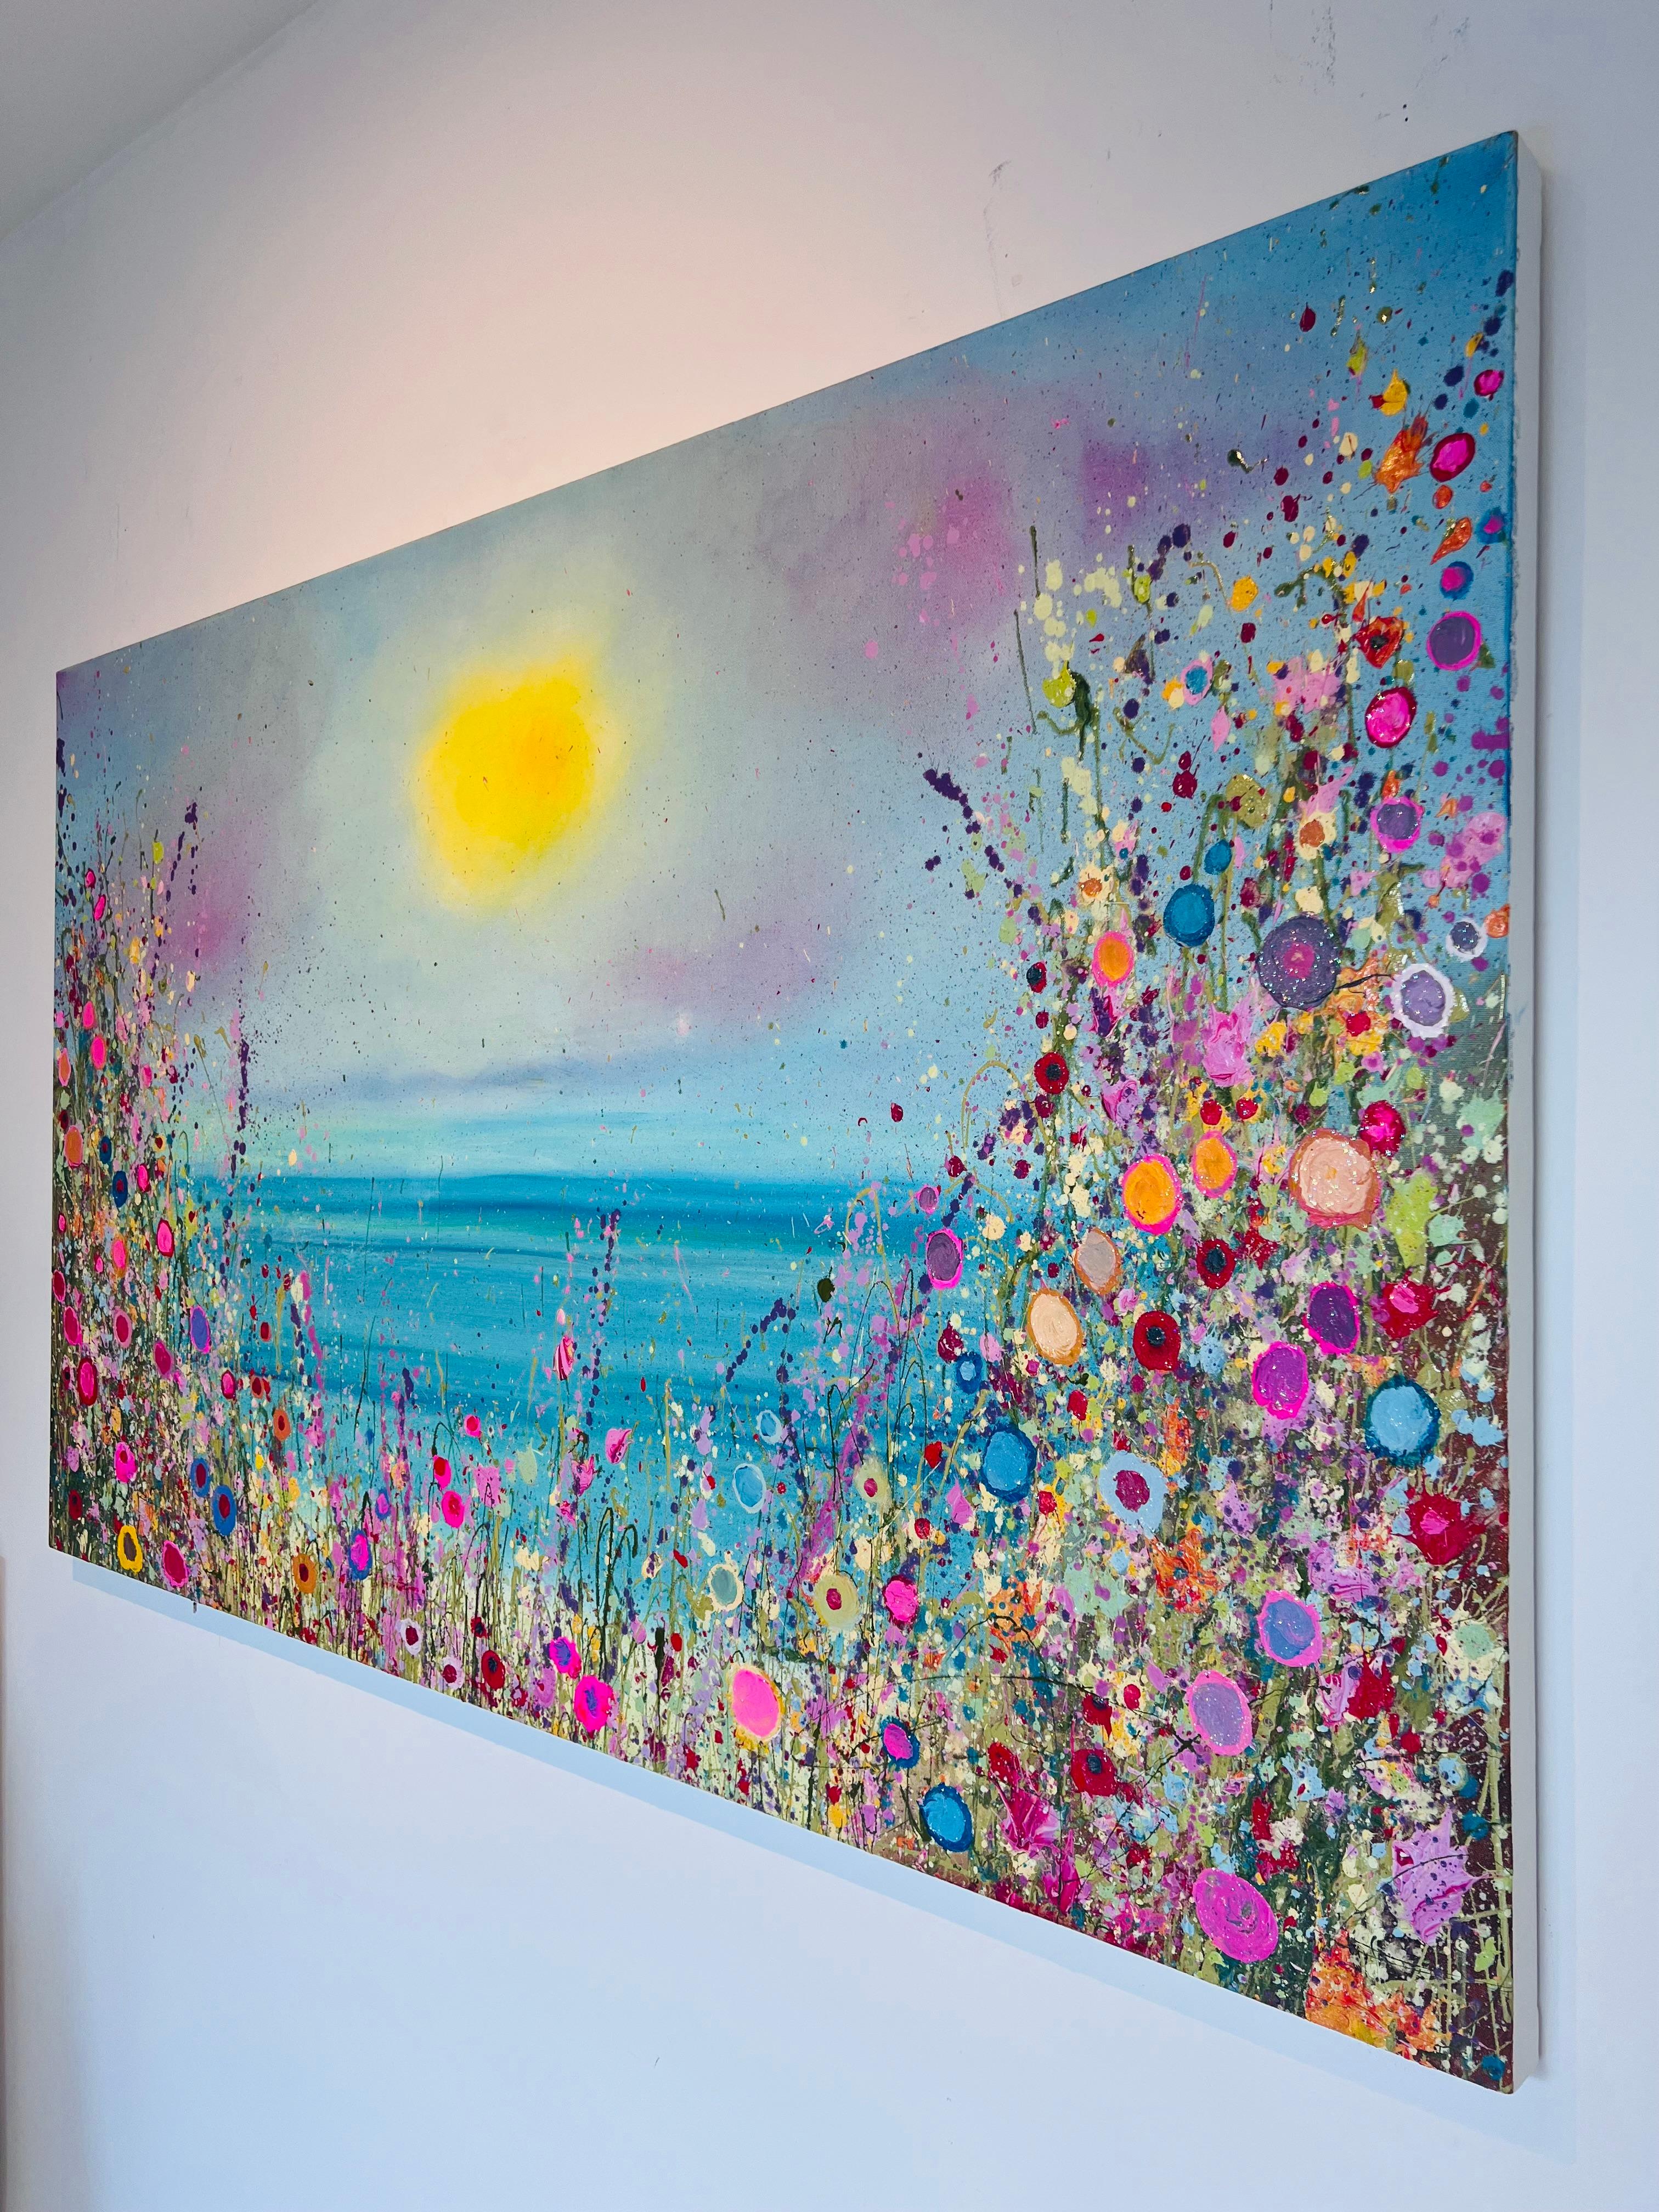 Let The Magic In - original abstract oil floral scape painting Contemporary art - Abstract Expressionist Painting by Yvonne Coomber